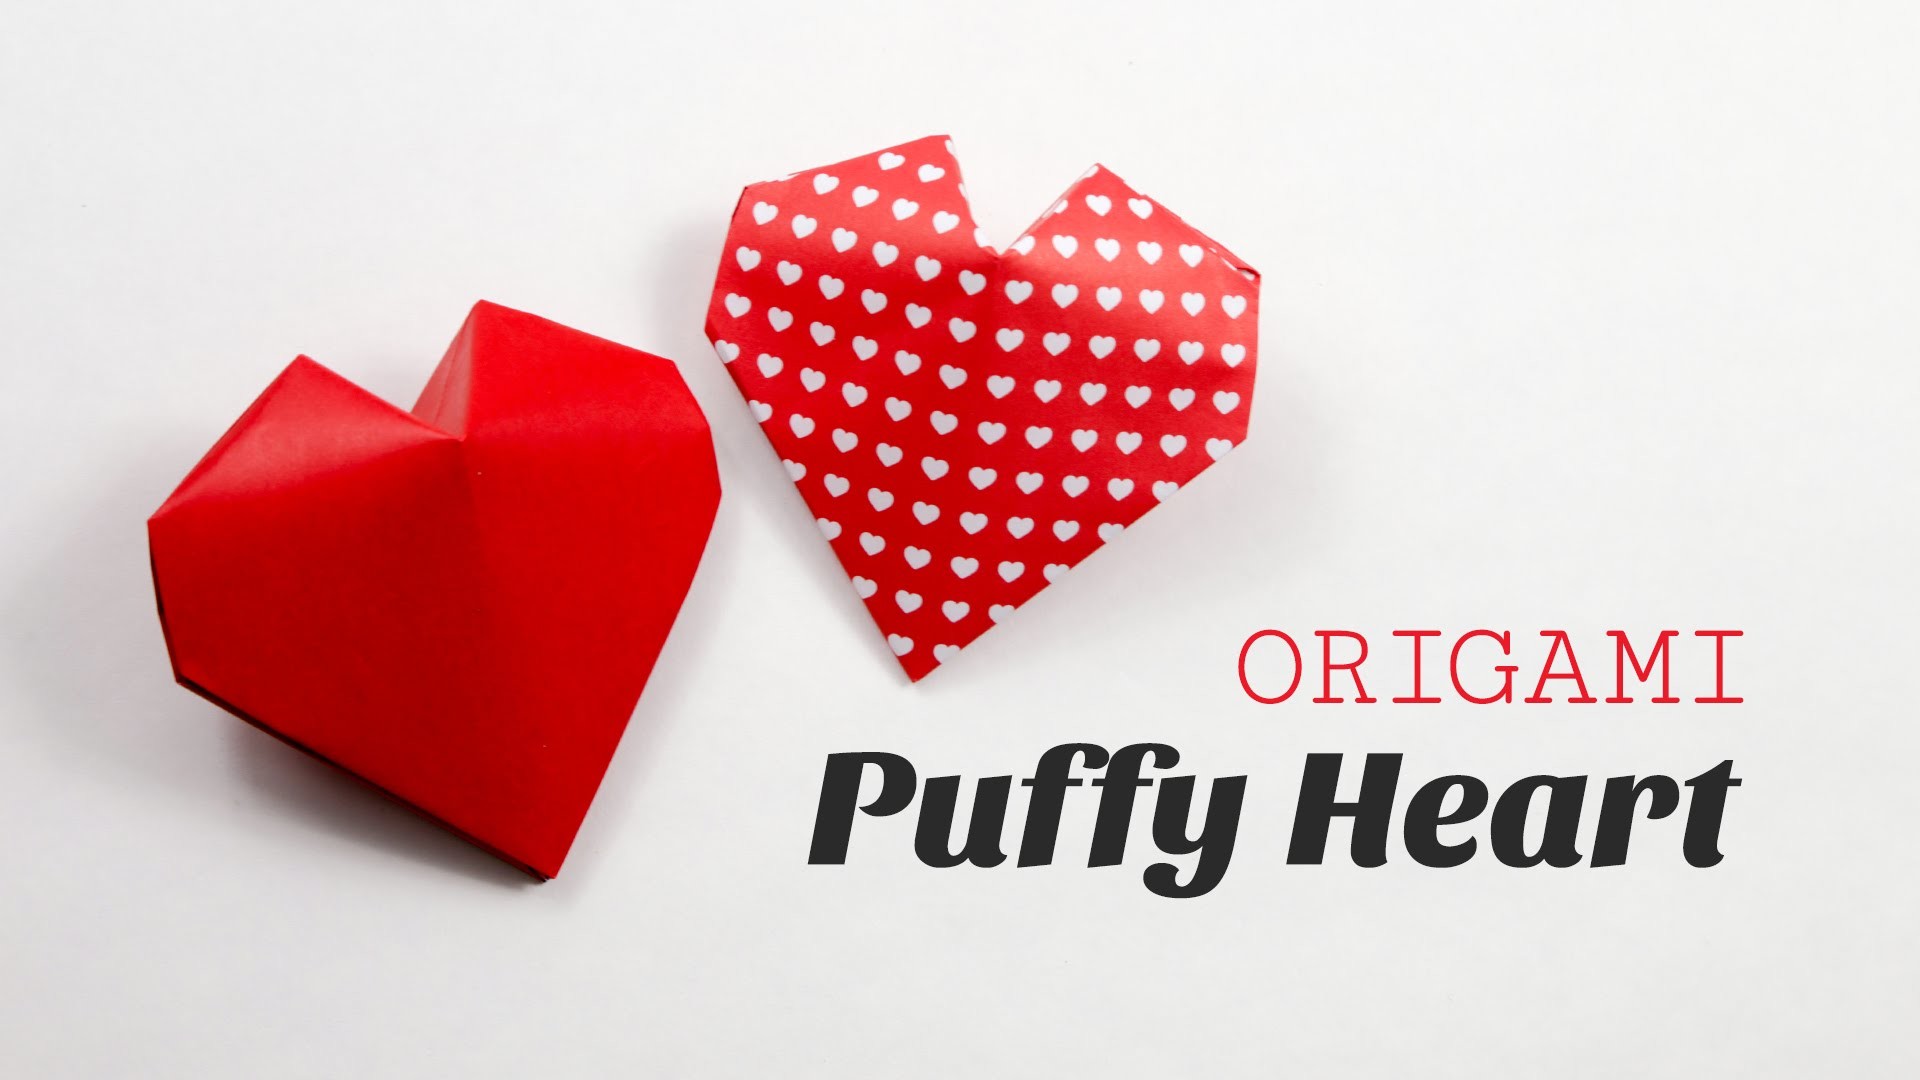 Origami Puffy Heart Instructions 3D Paper Heart